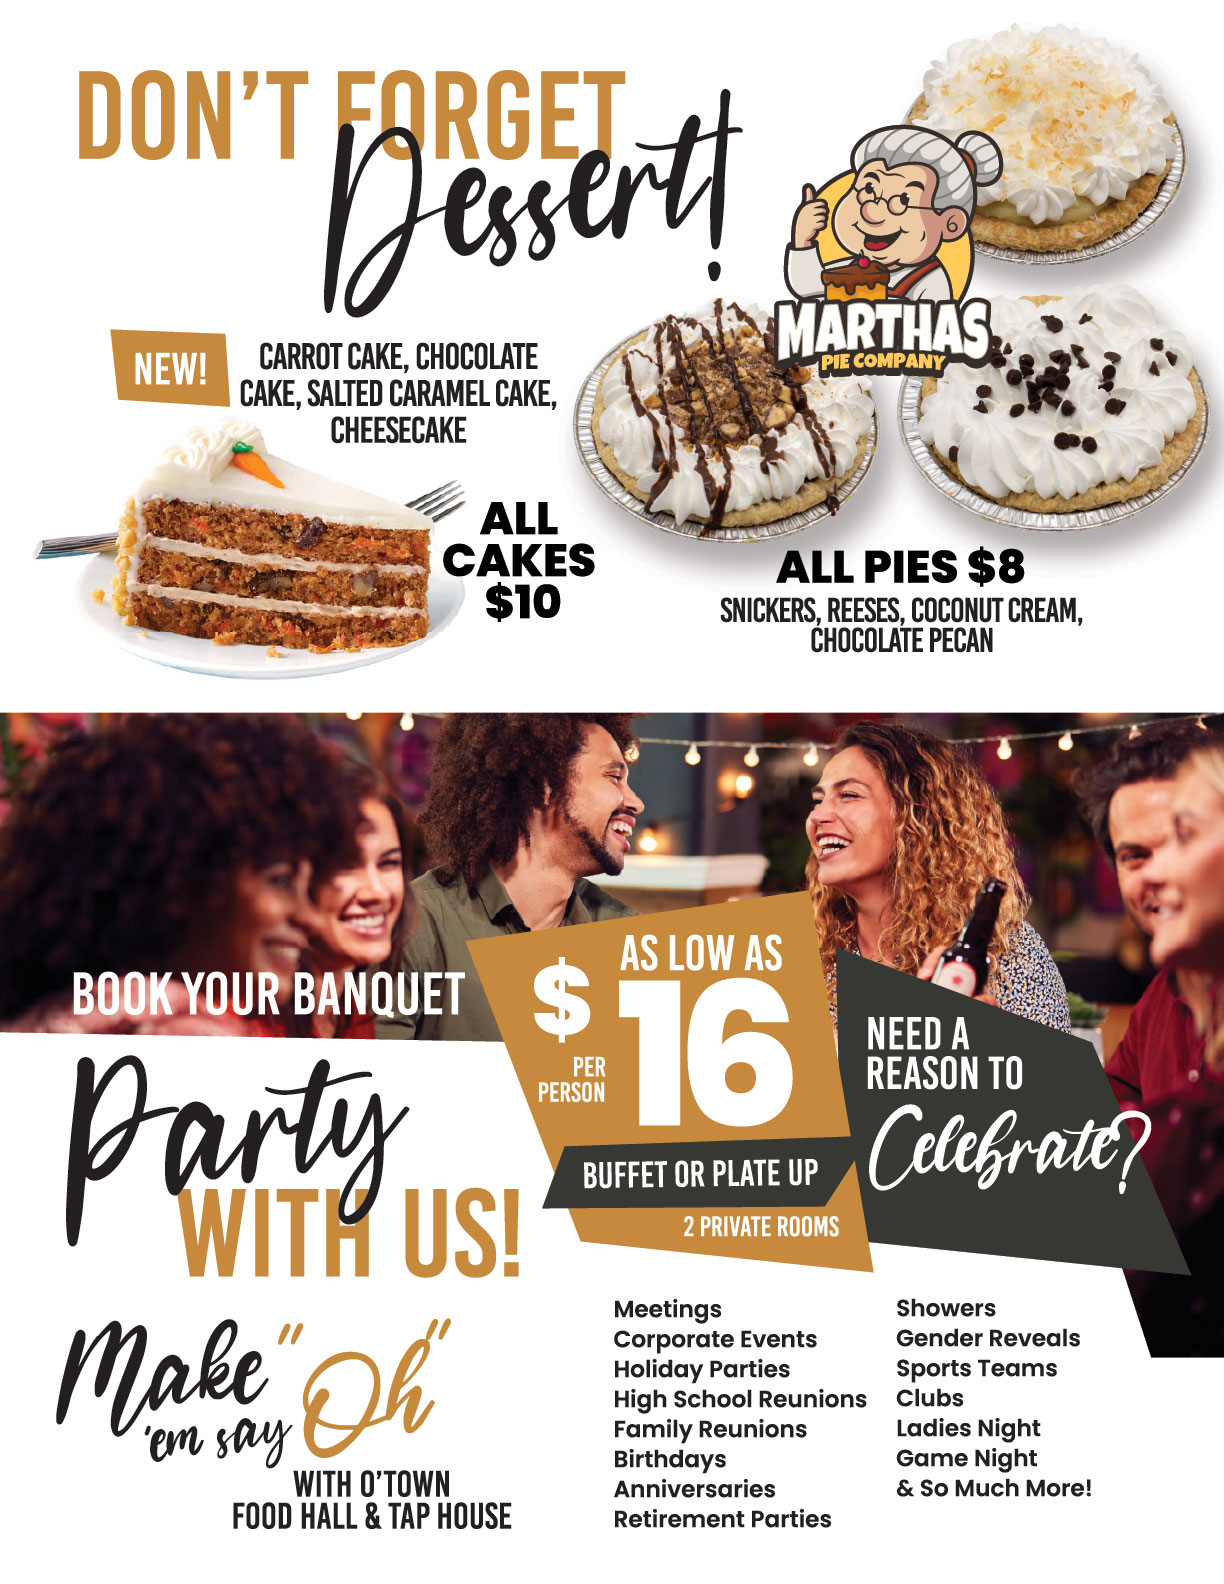 O'Town Food Hall & Tap House Desserts, Banquet & Party Room Menu